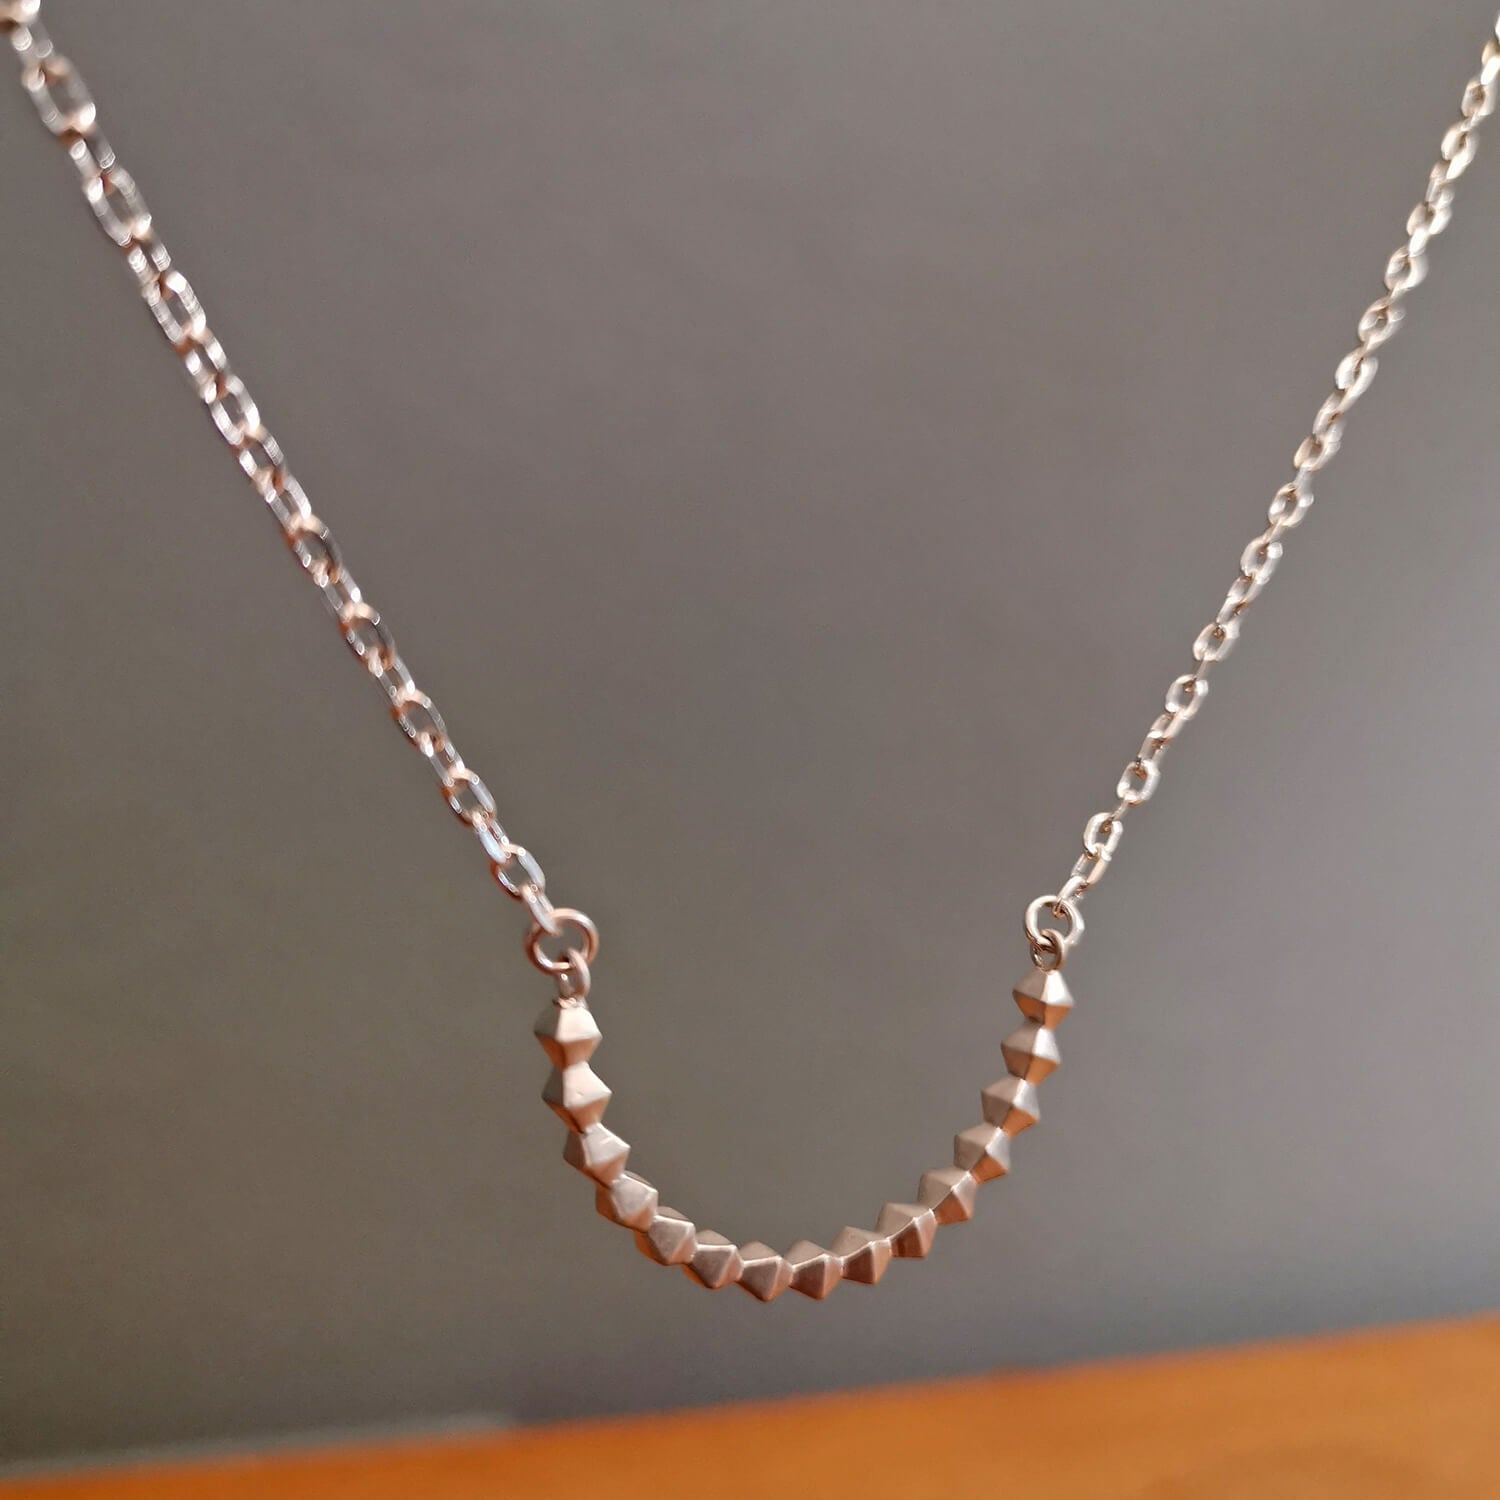 Pyra Necklace in Sterling Silver